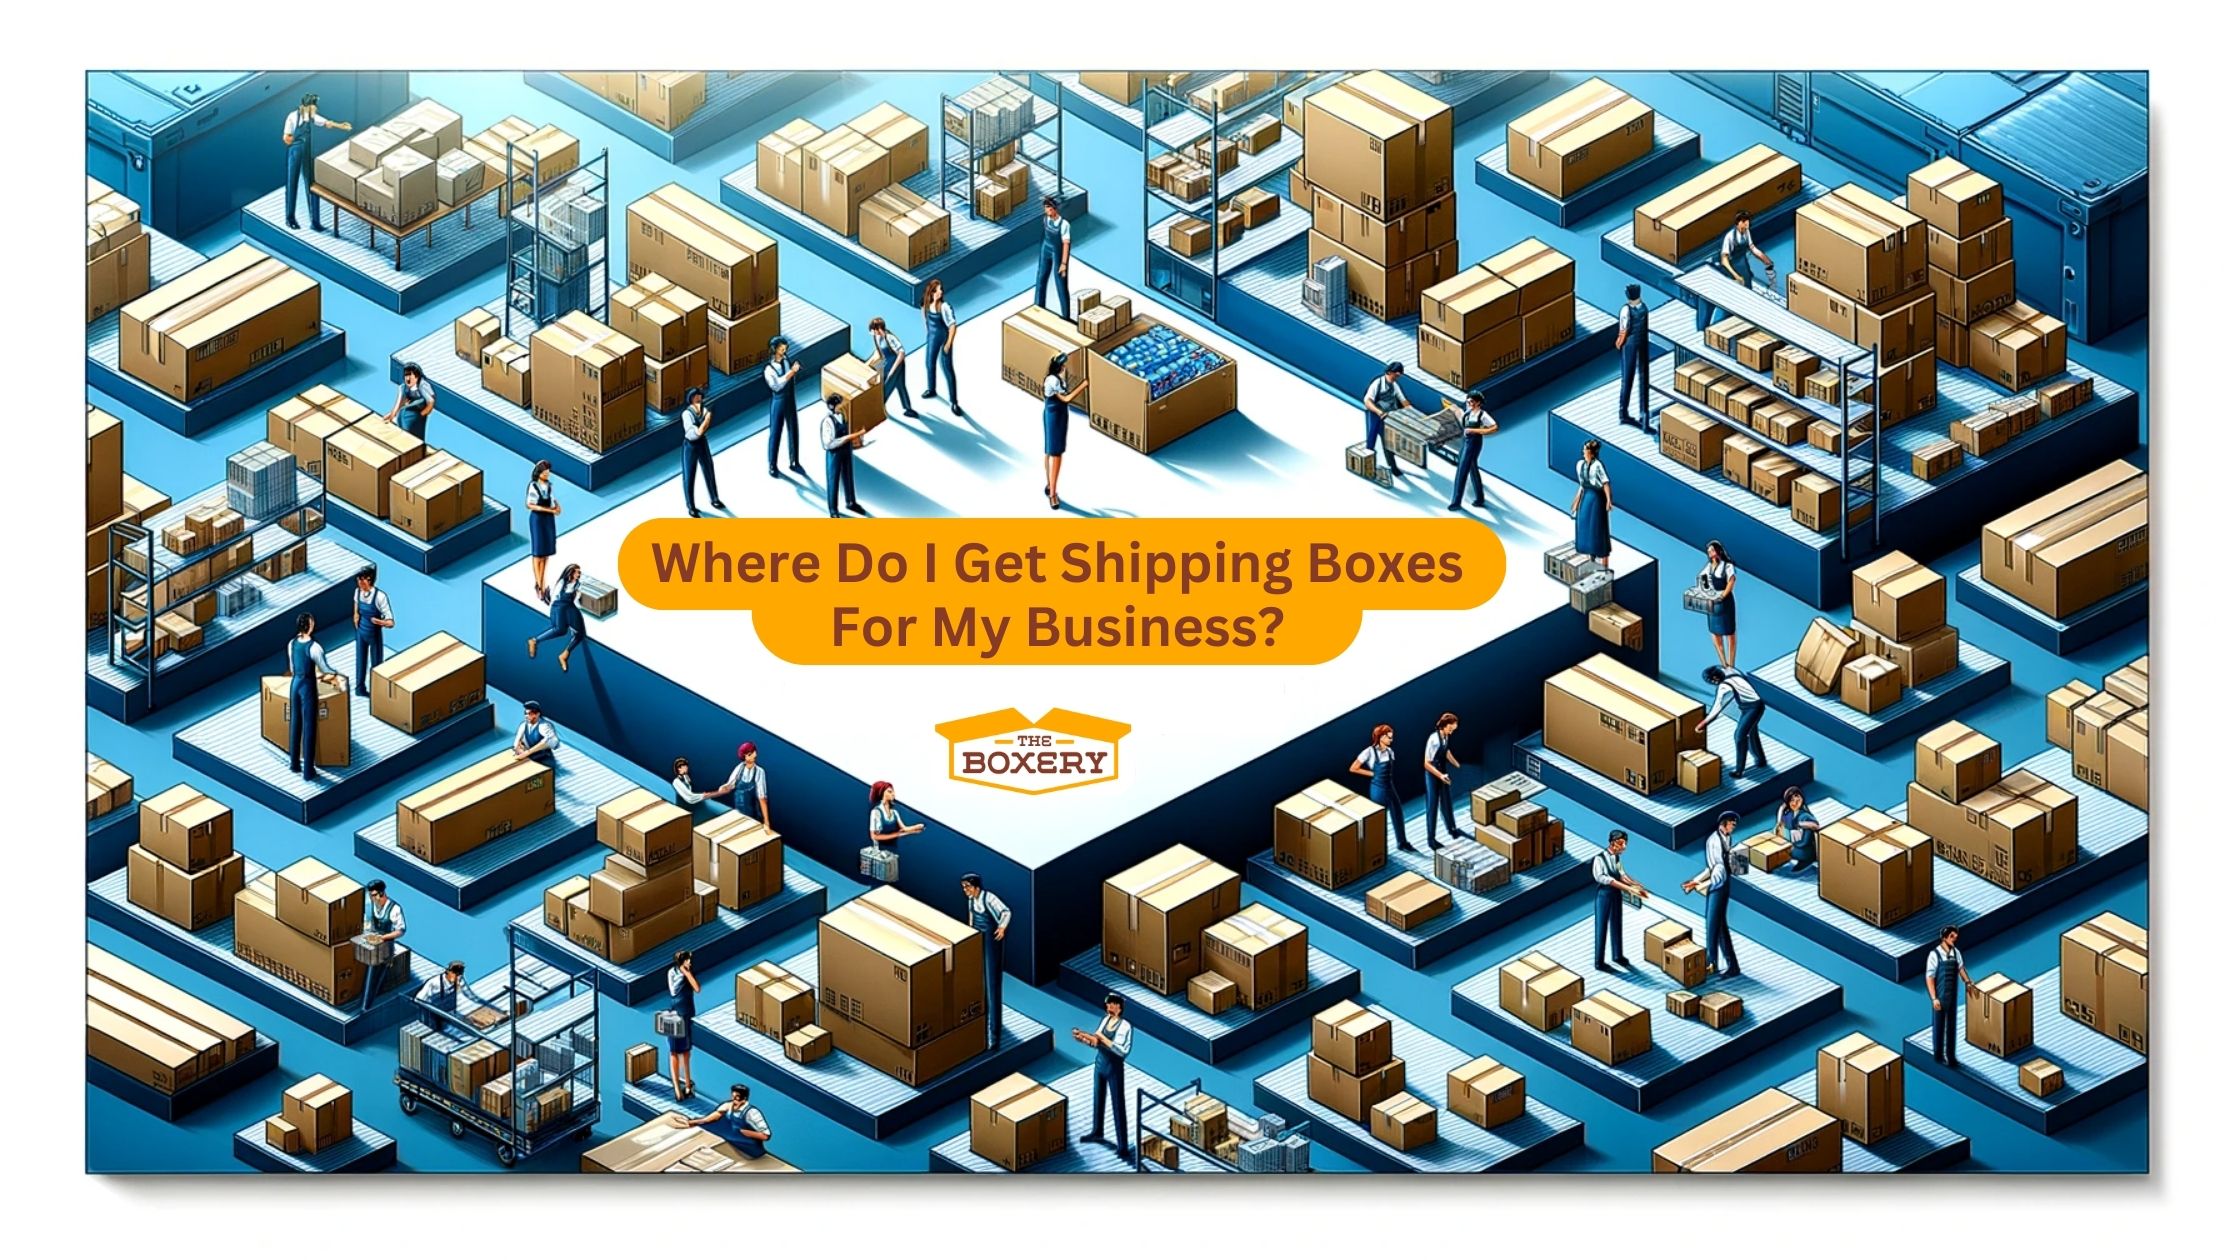 Where Do I Get Shipping Boxes for My Business?